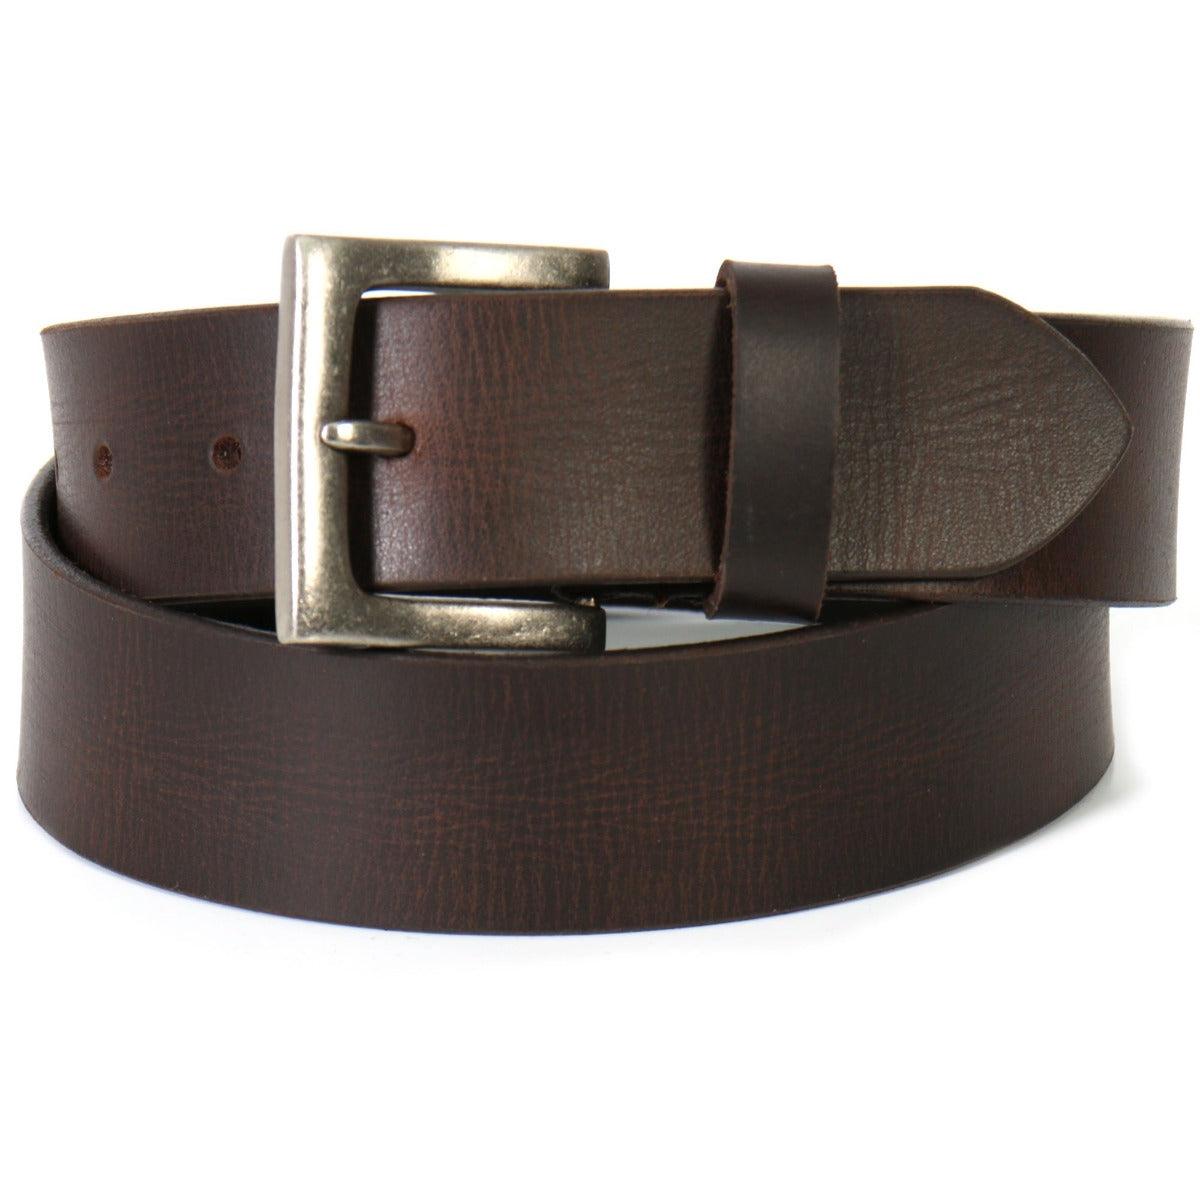 Hot Leathers Distressed Brown Genuine Leather Belt - American Legend Rider